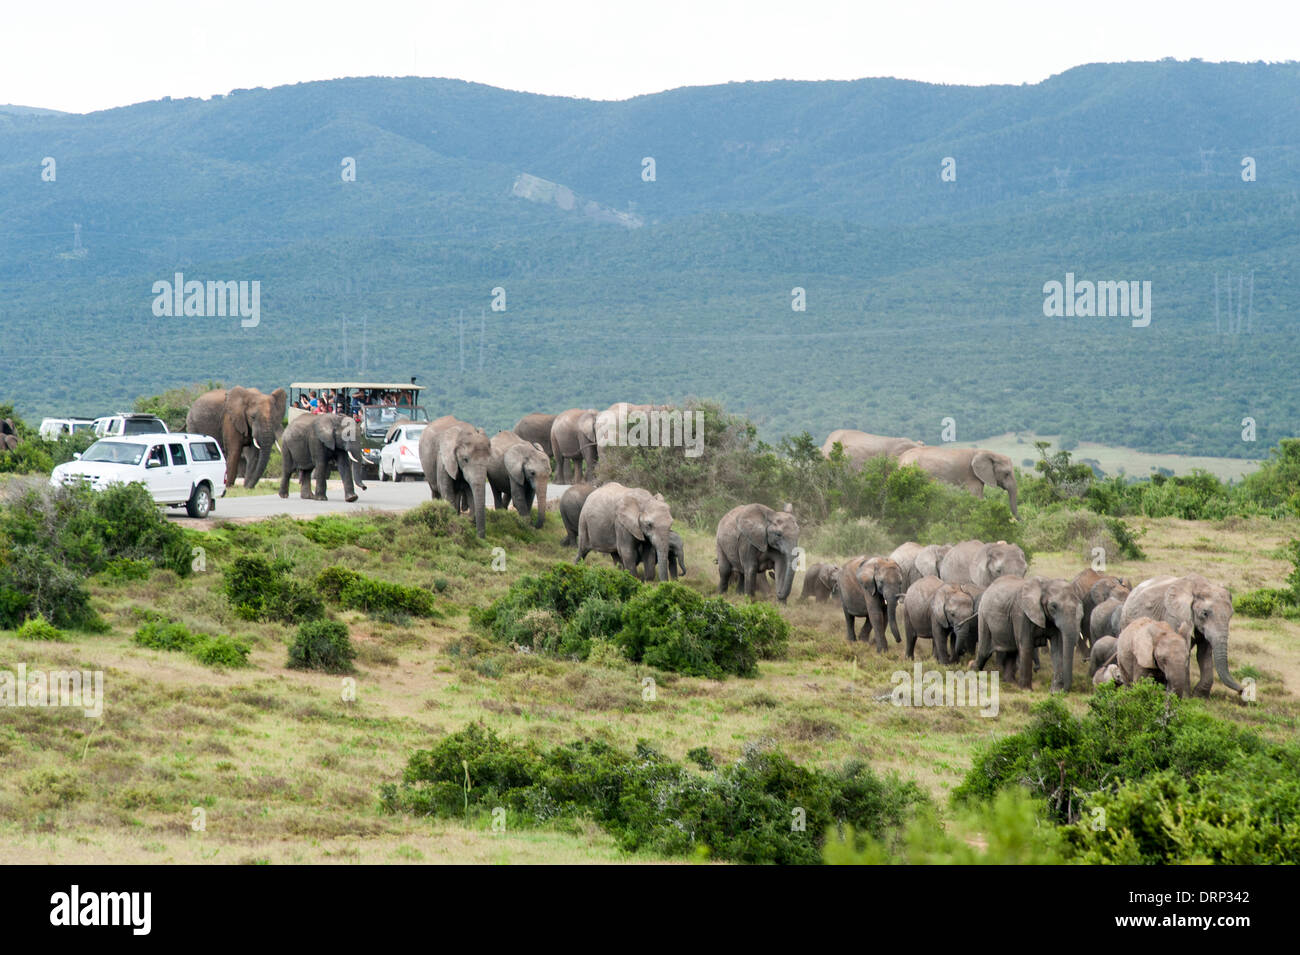 Tourists watching an elephant herd (Loxodonta africana) crossing the road between cars, Addo Elephant National Park South Africa Stock Photo